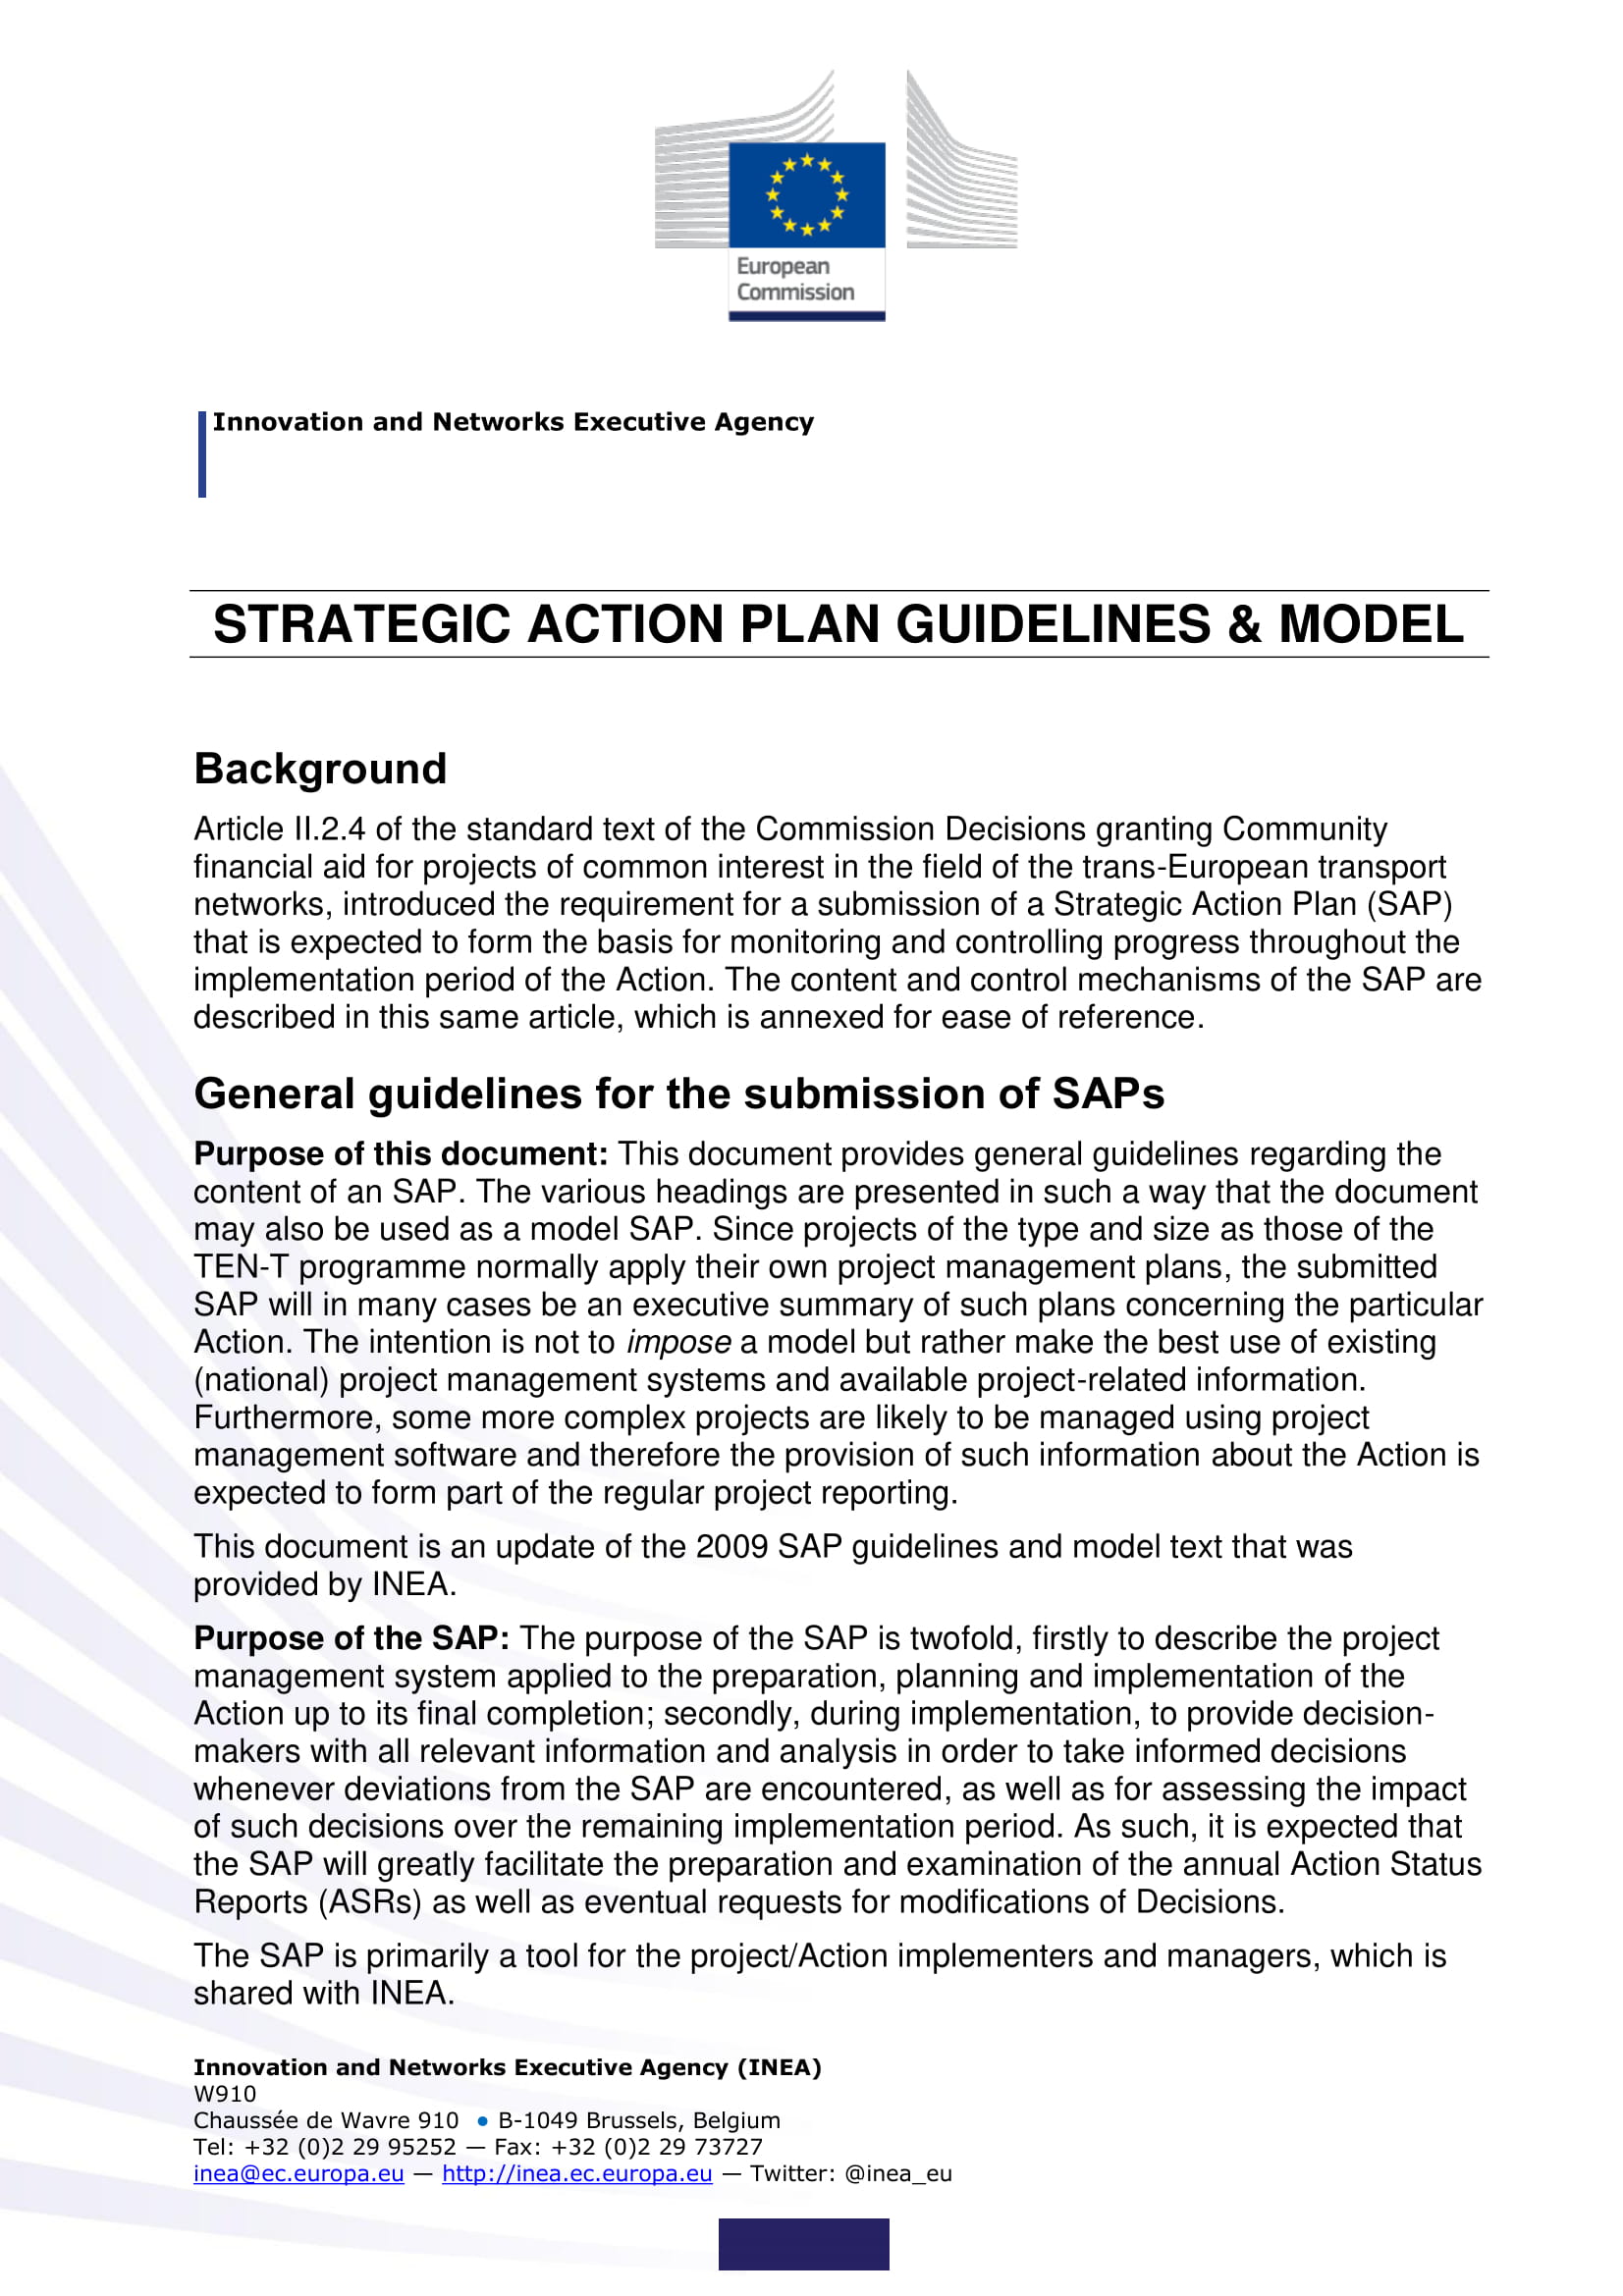 strategic action plan guidelines and model example 1